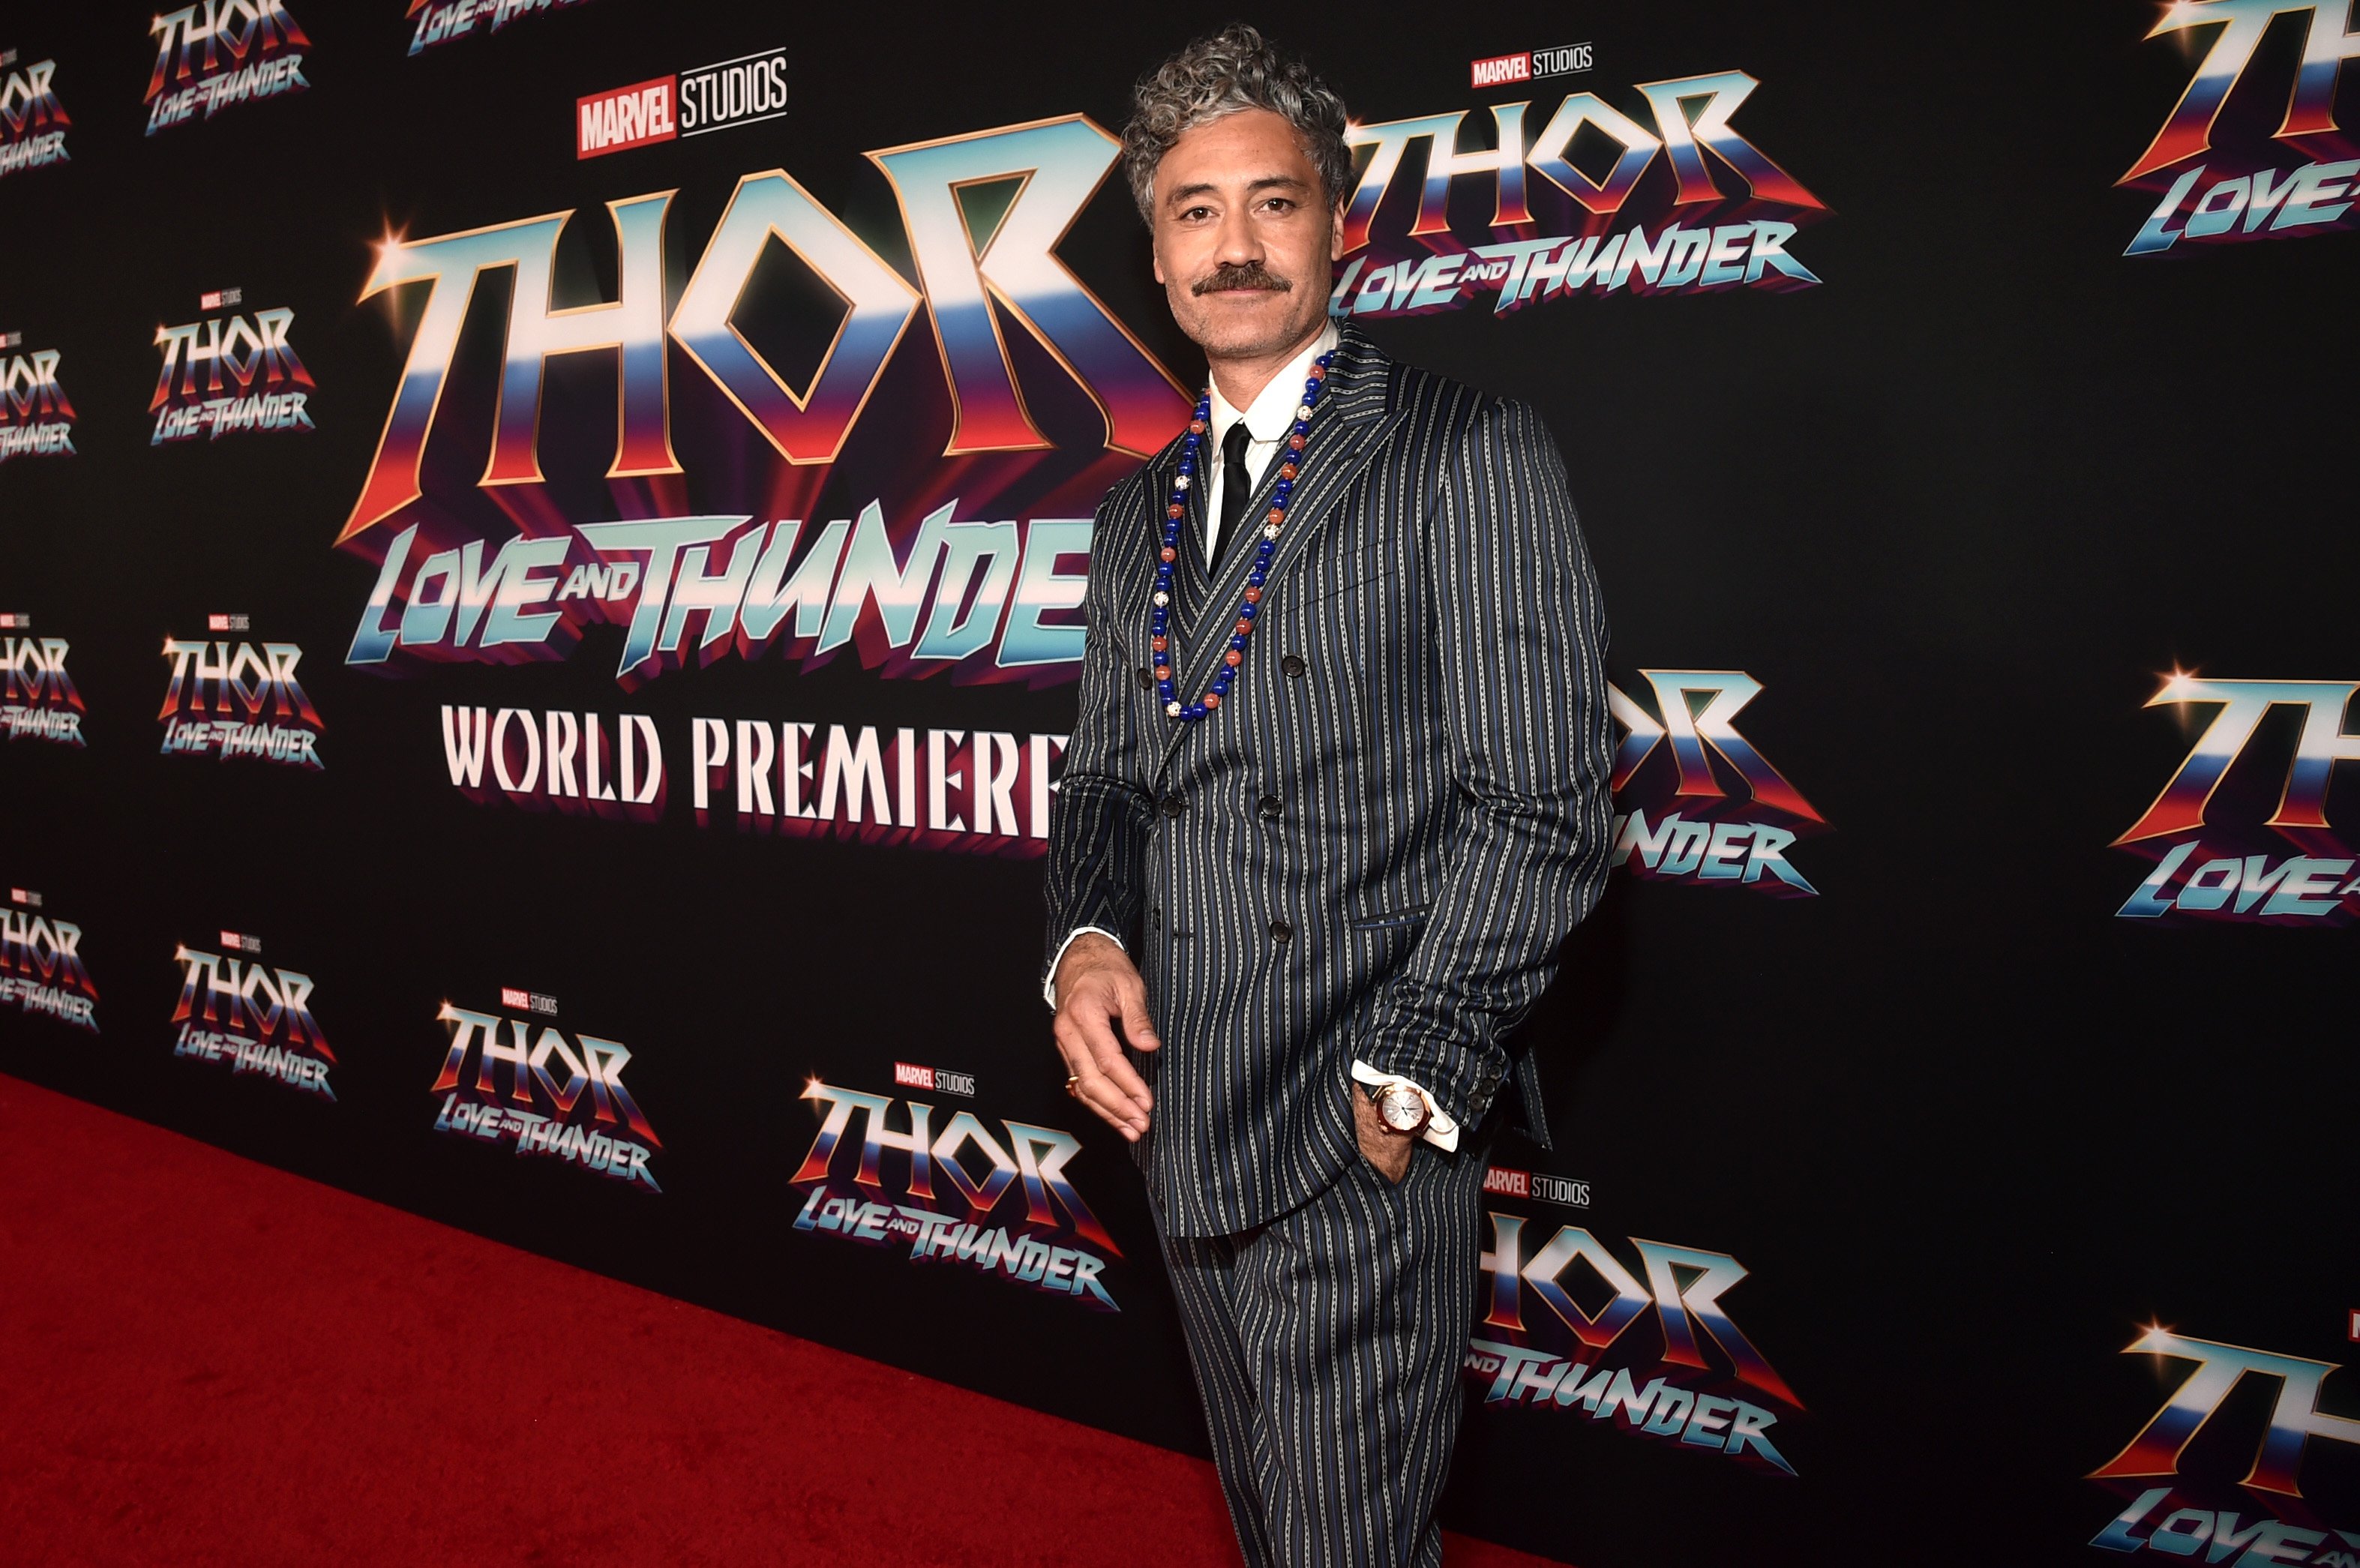 Star Wars director Taika Waititi attends the Los Angeles premiere of Thor: Love and Thunder